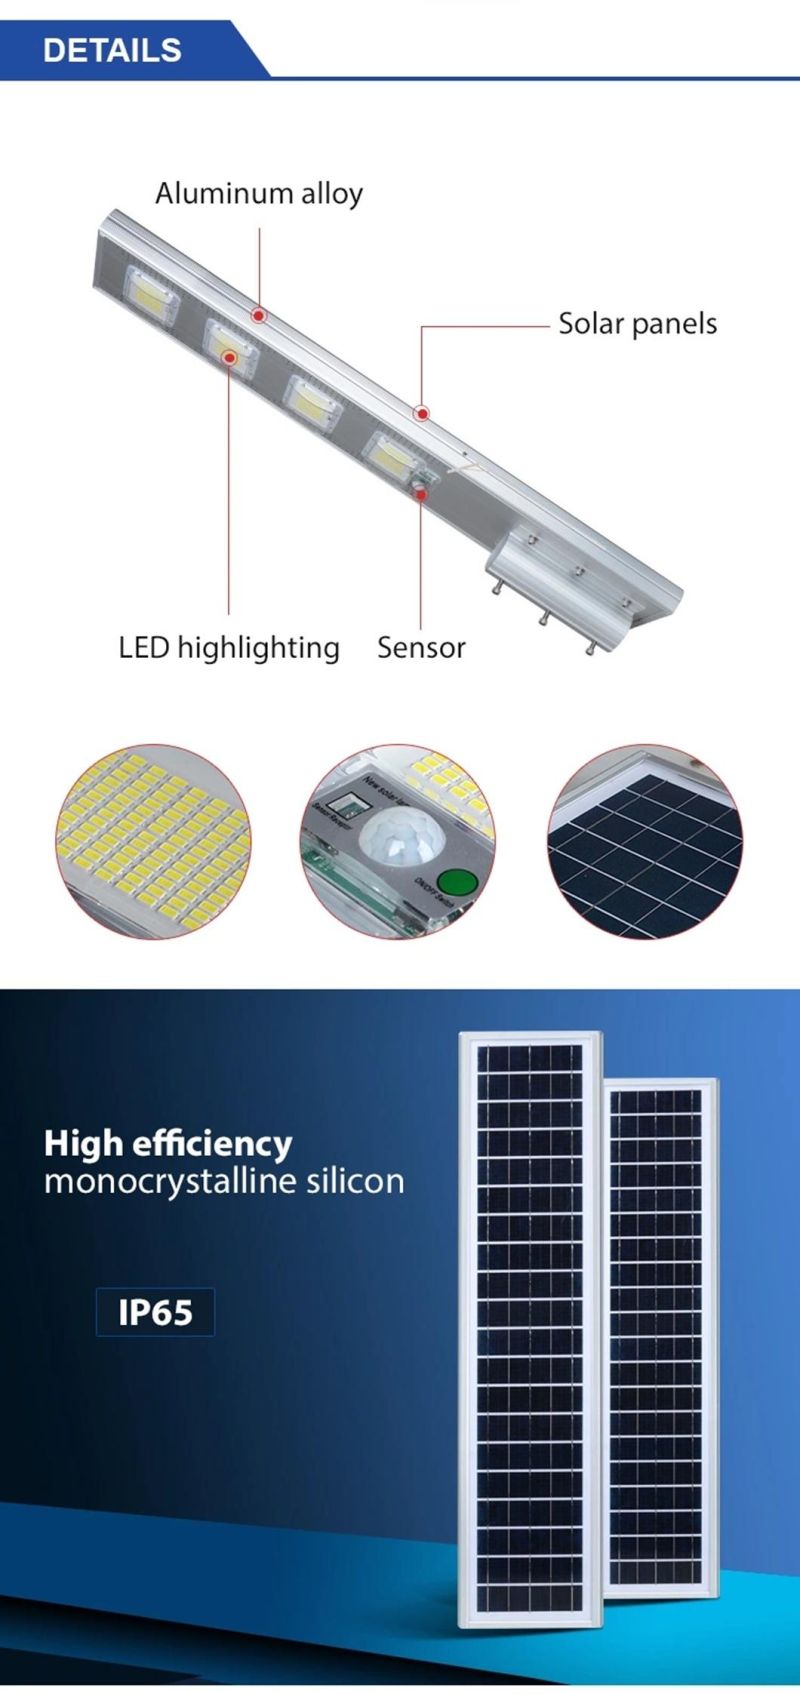 30W All in One Integrated Solar LED Street Light Warm White Color Temperature